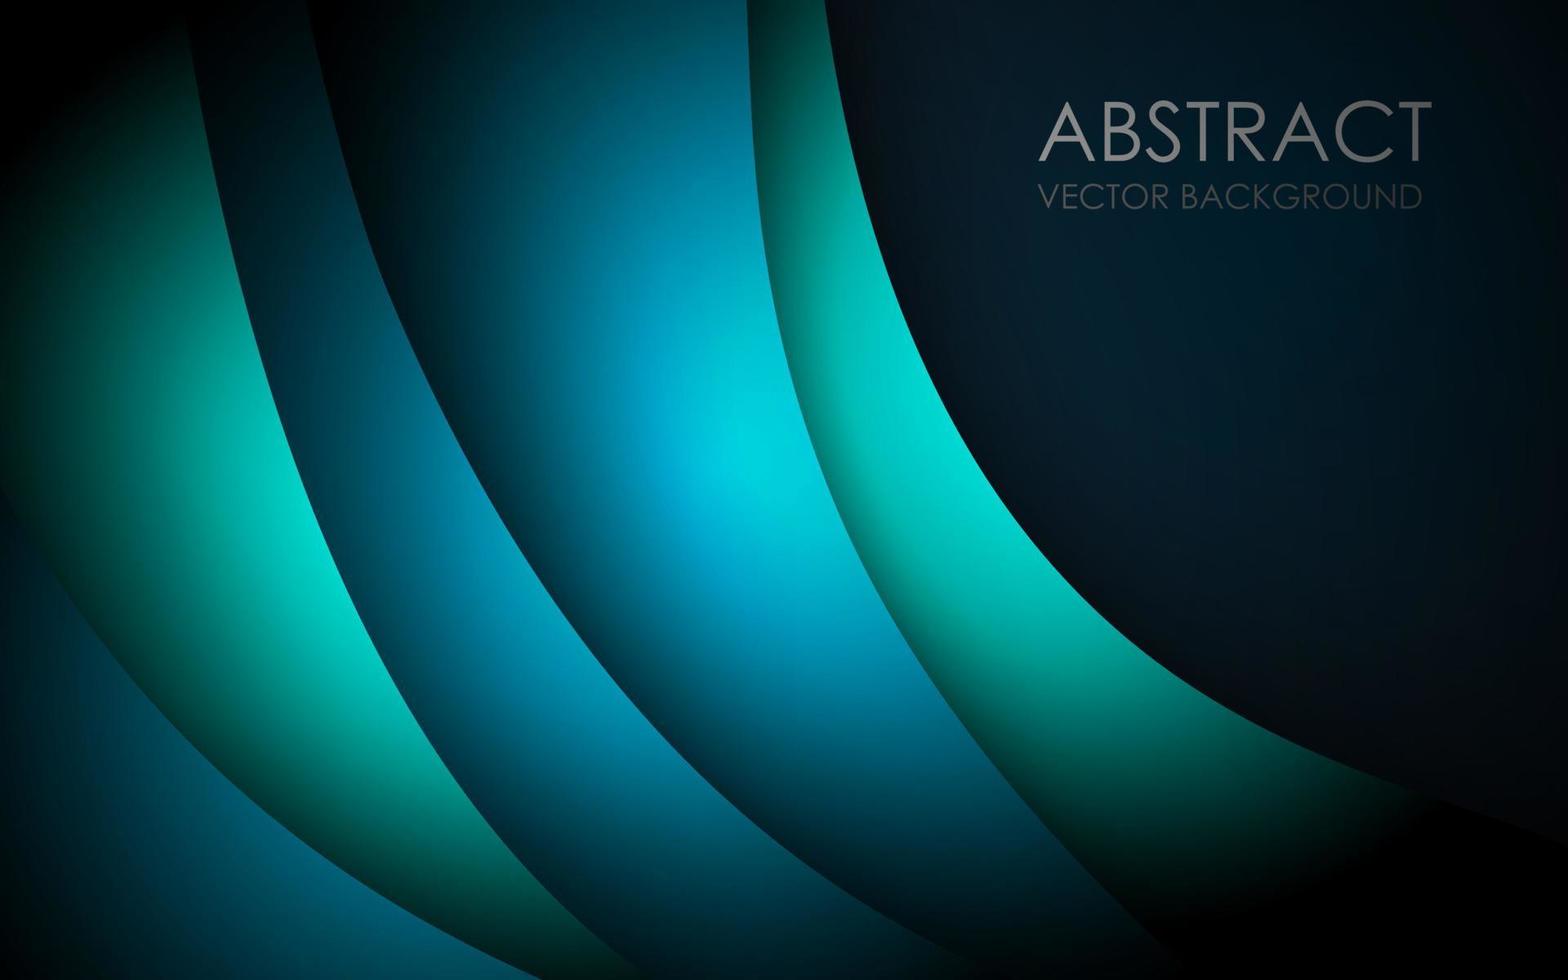 Abstract green blue and white overlap triangle on blank space with text design modern luxury futuristic technology background vector illustration.